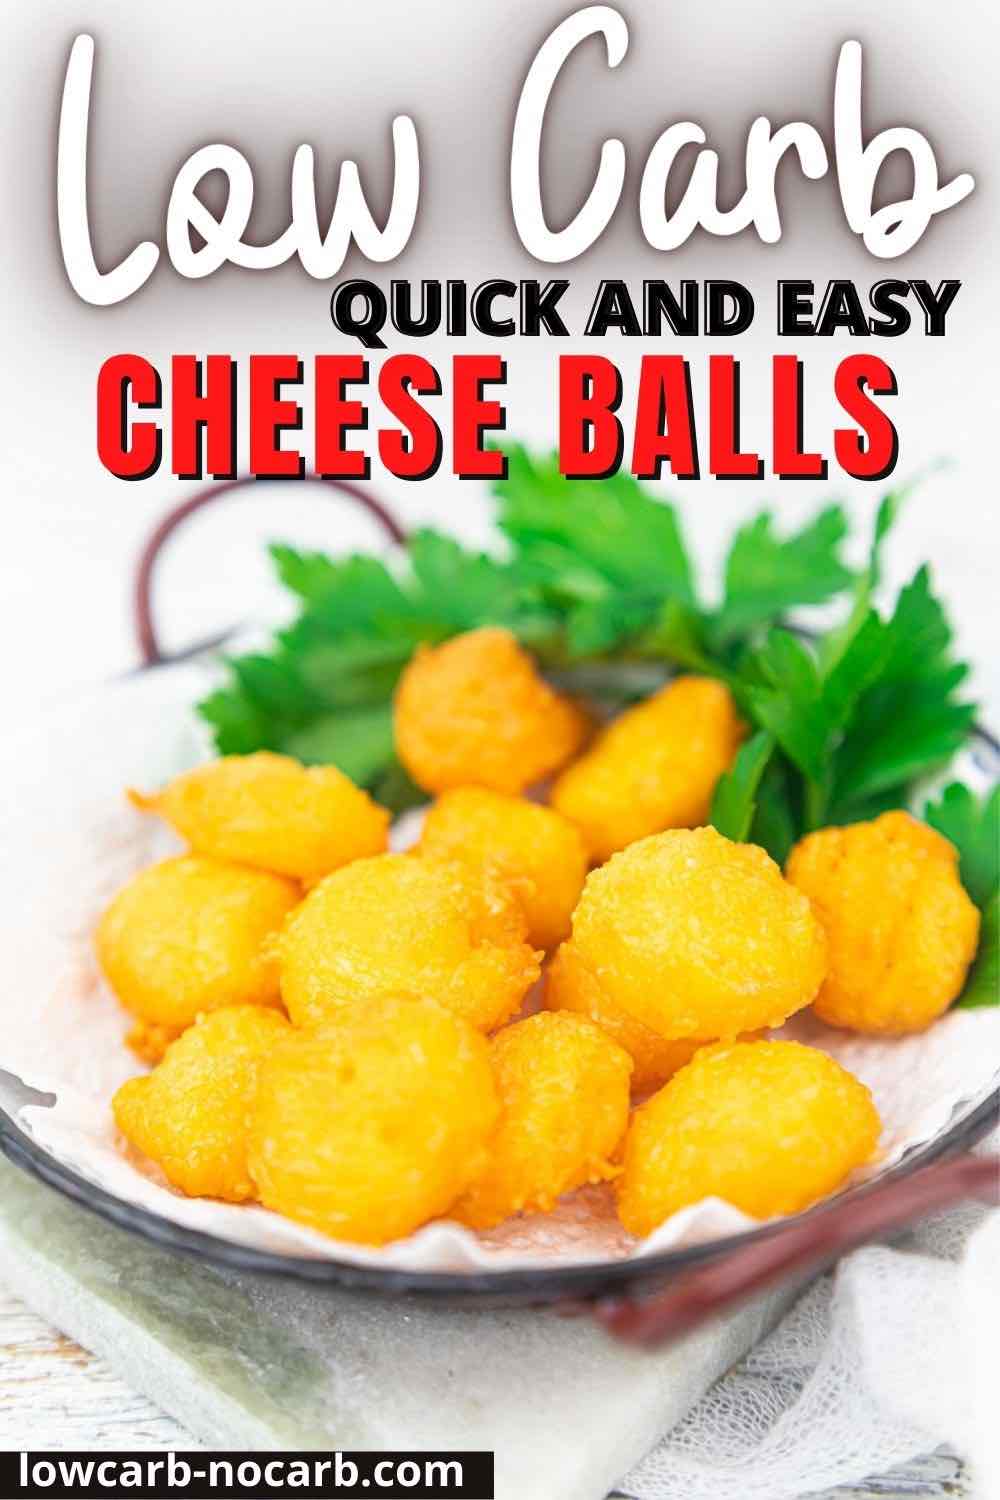 Fried Cheese Balls in a bowl with parsley